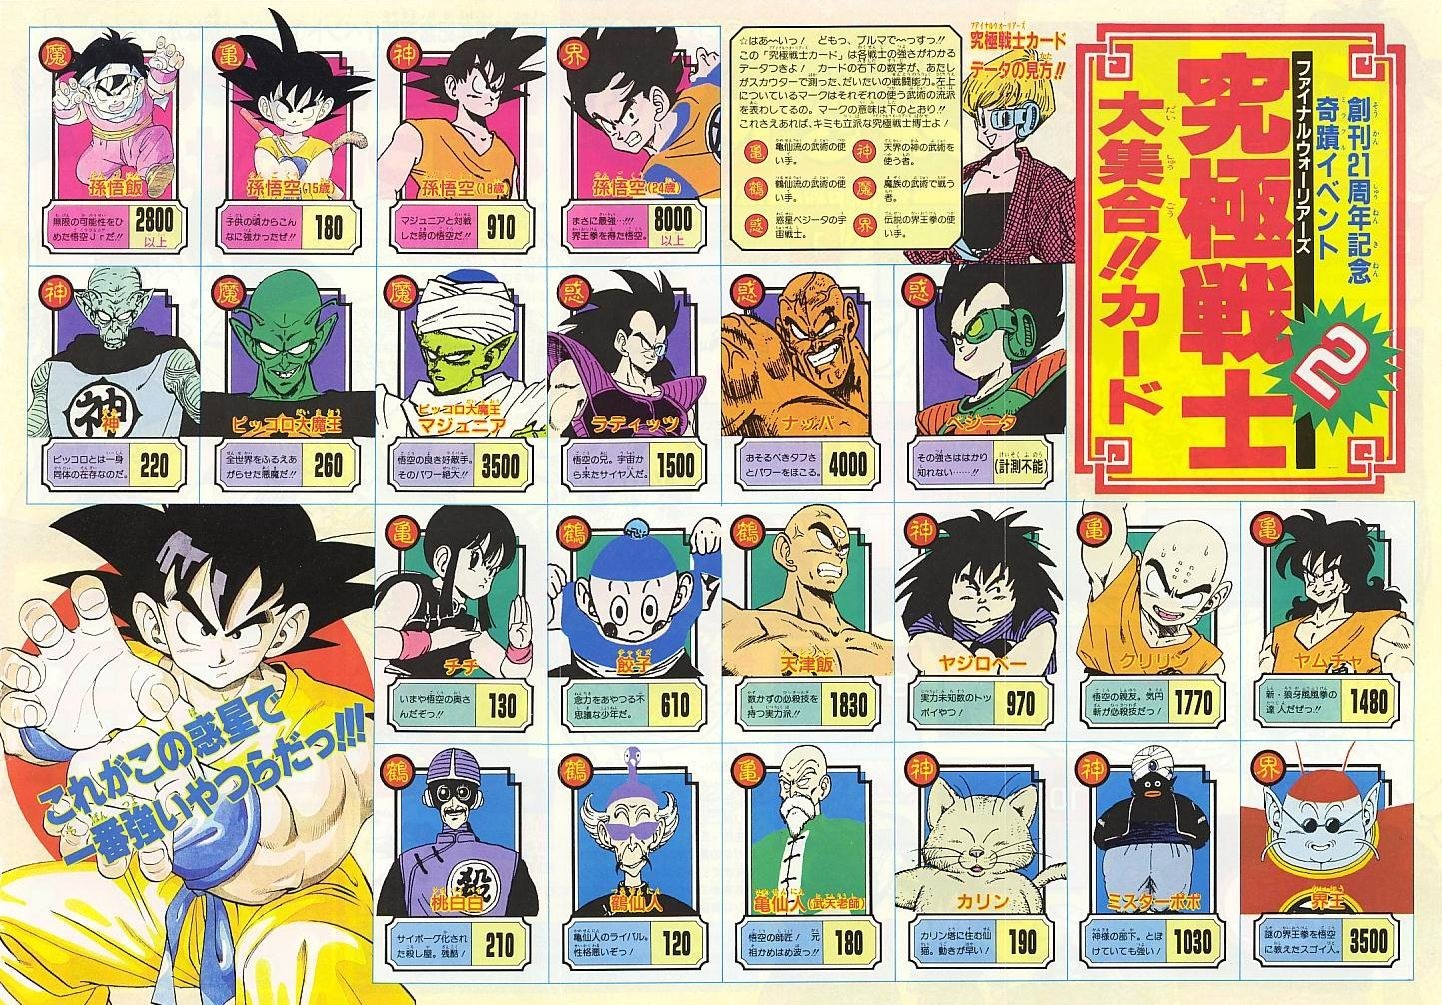 Dragon Ball Z Characters Power Levels